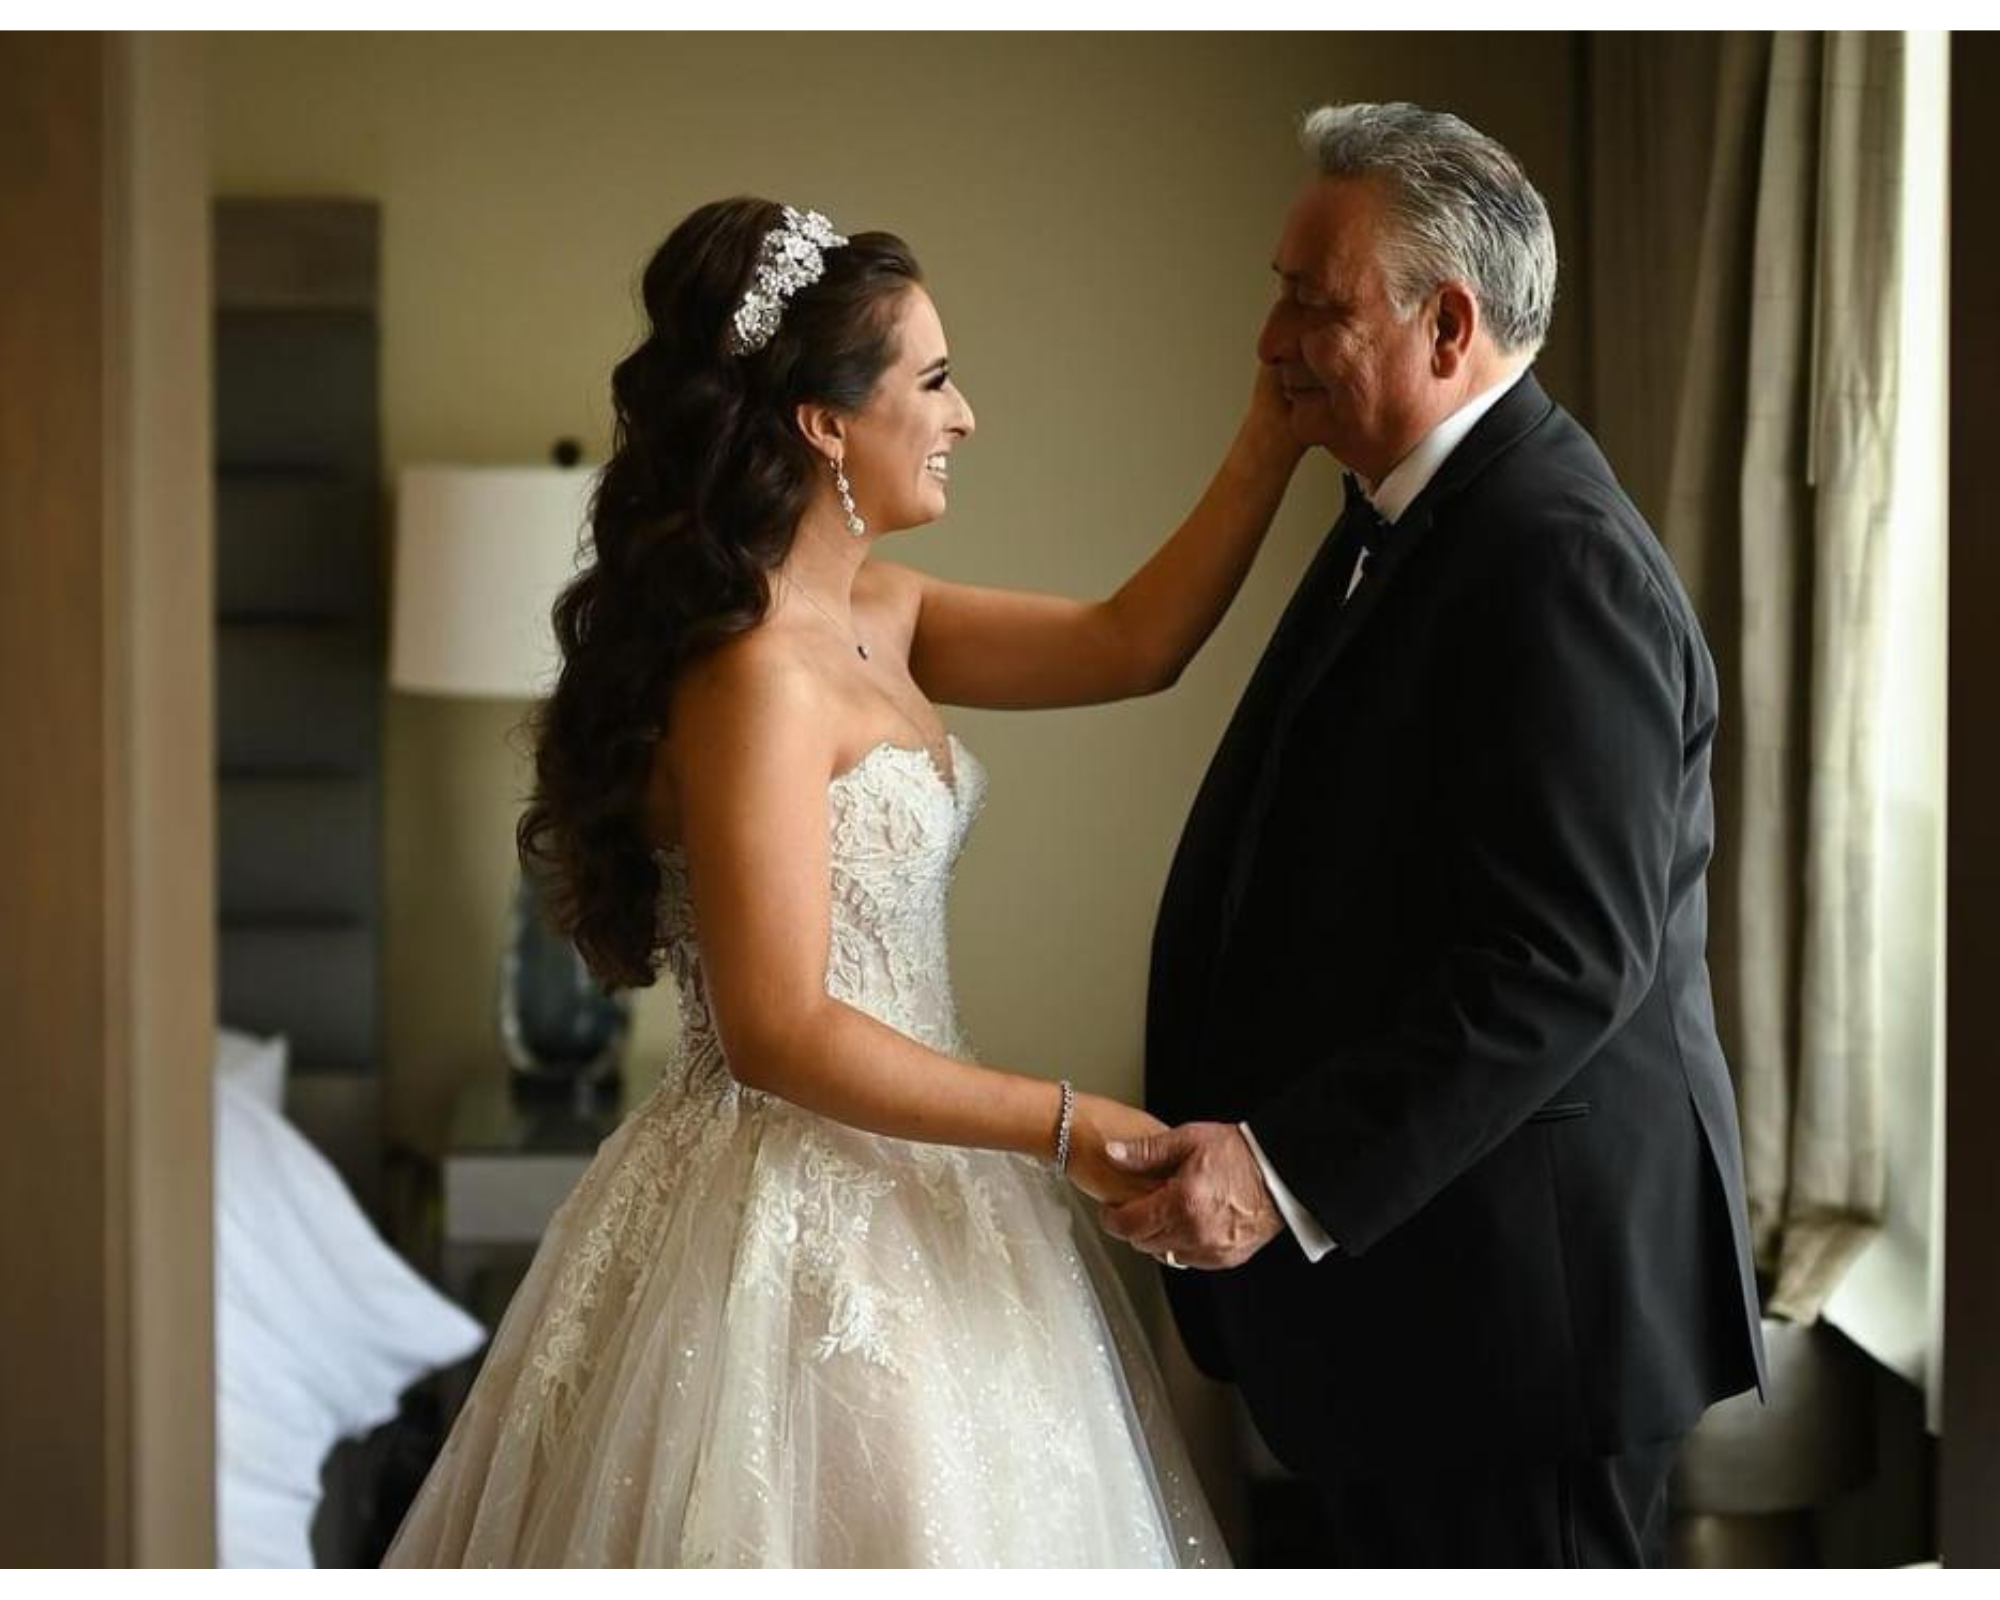 A beautiful bride’s first look with her dad. She is wearing an elegant wedding dress with  her hair down and custom crystal flower headband.